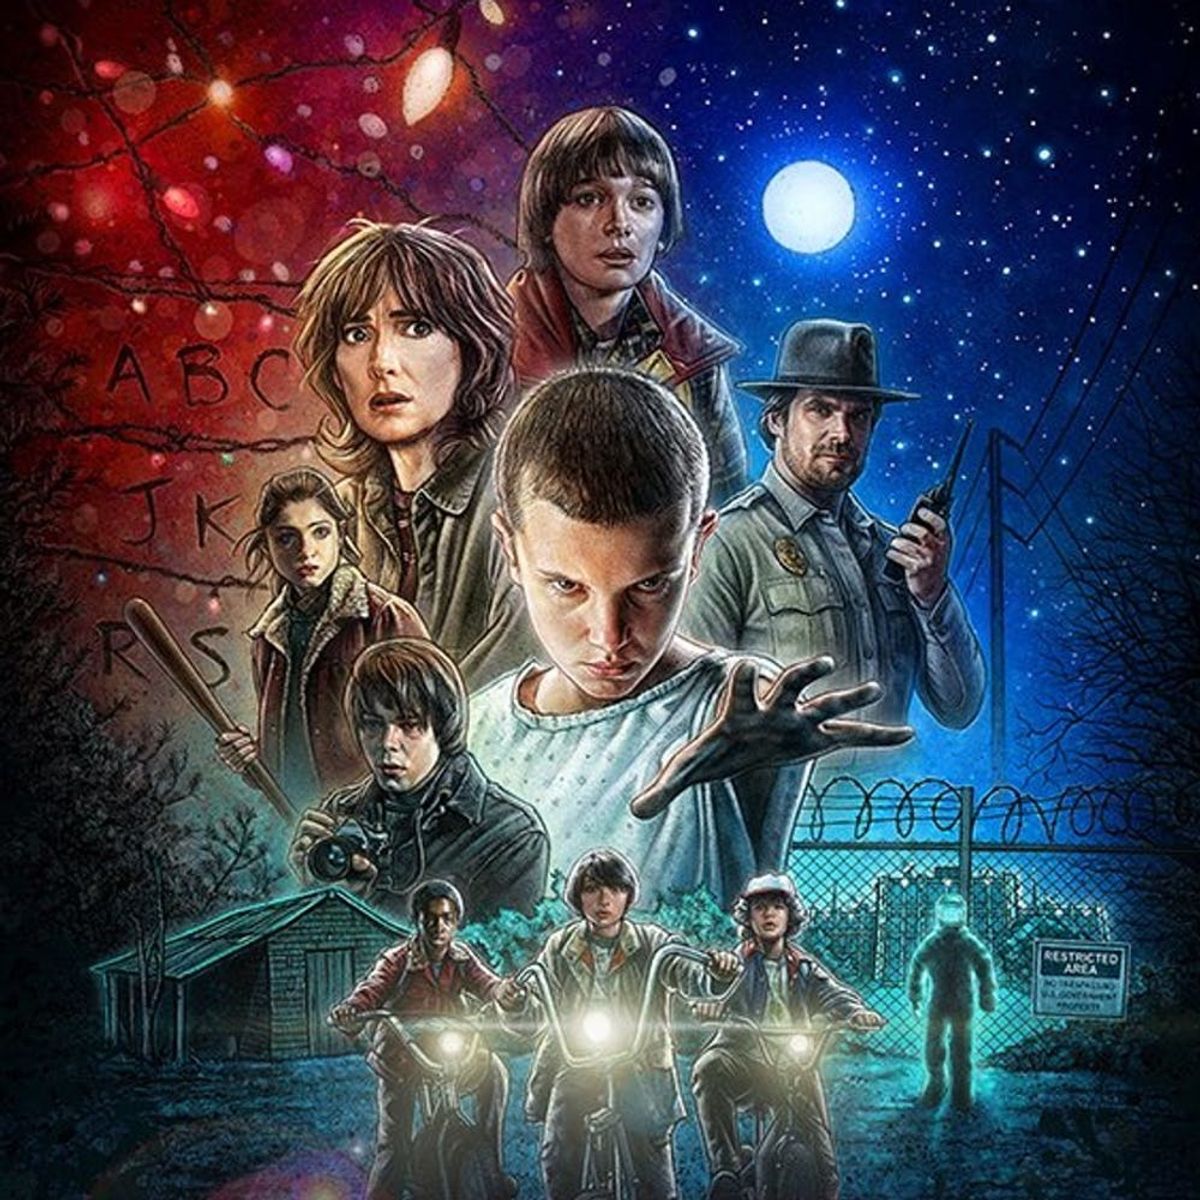 This Stranger Things News Will Have You Seriously Stoked for Season 2